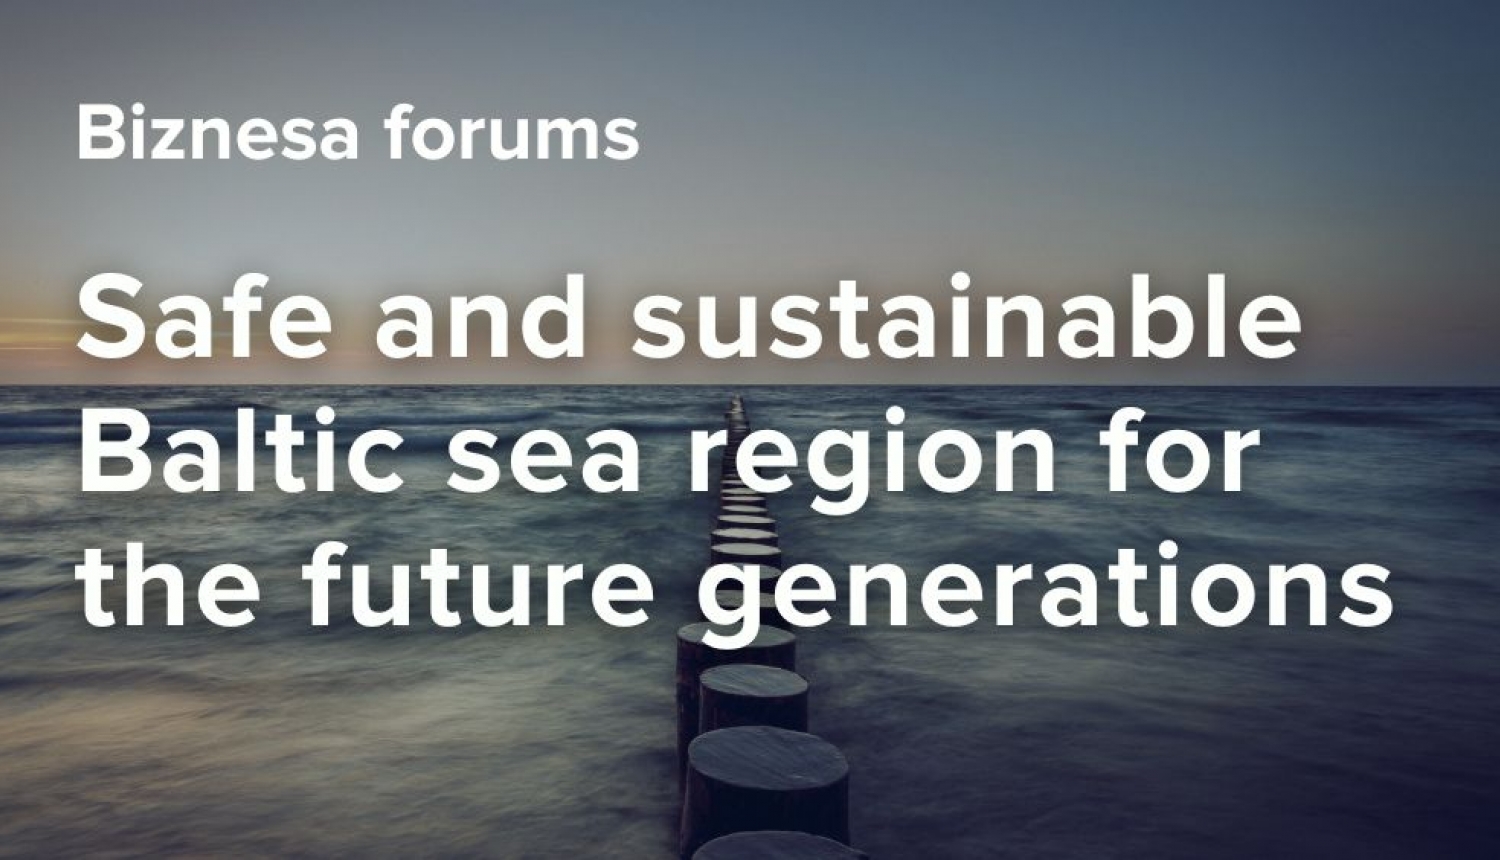 Safe and sustainable Baltic sea region for the future generations